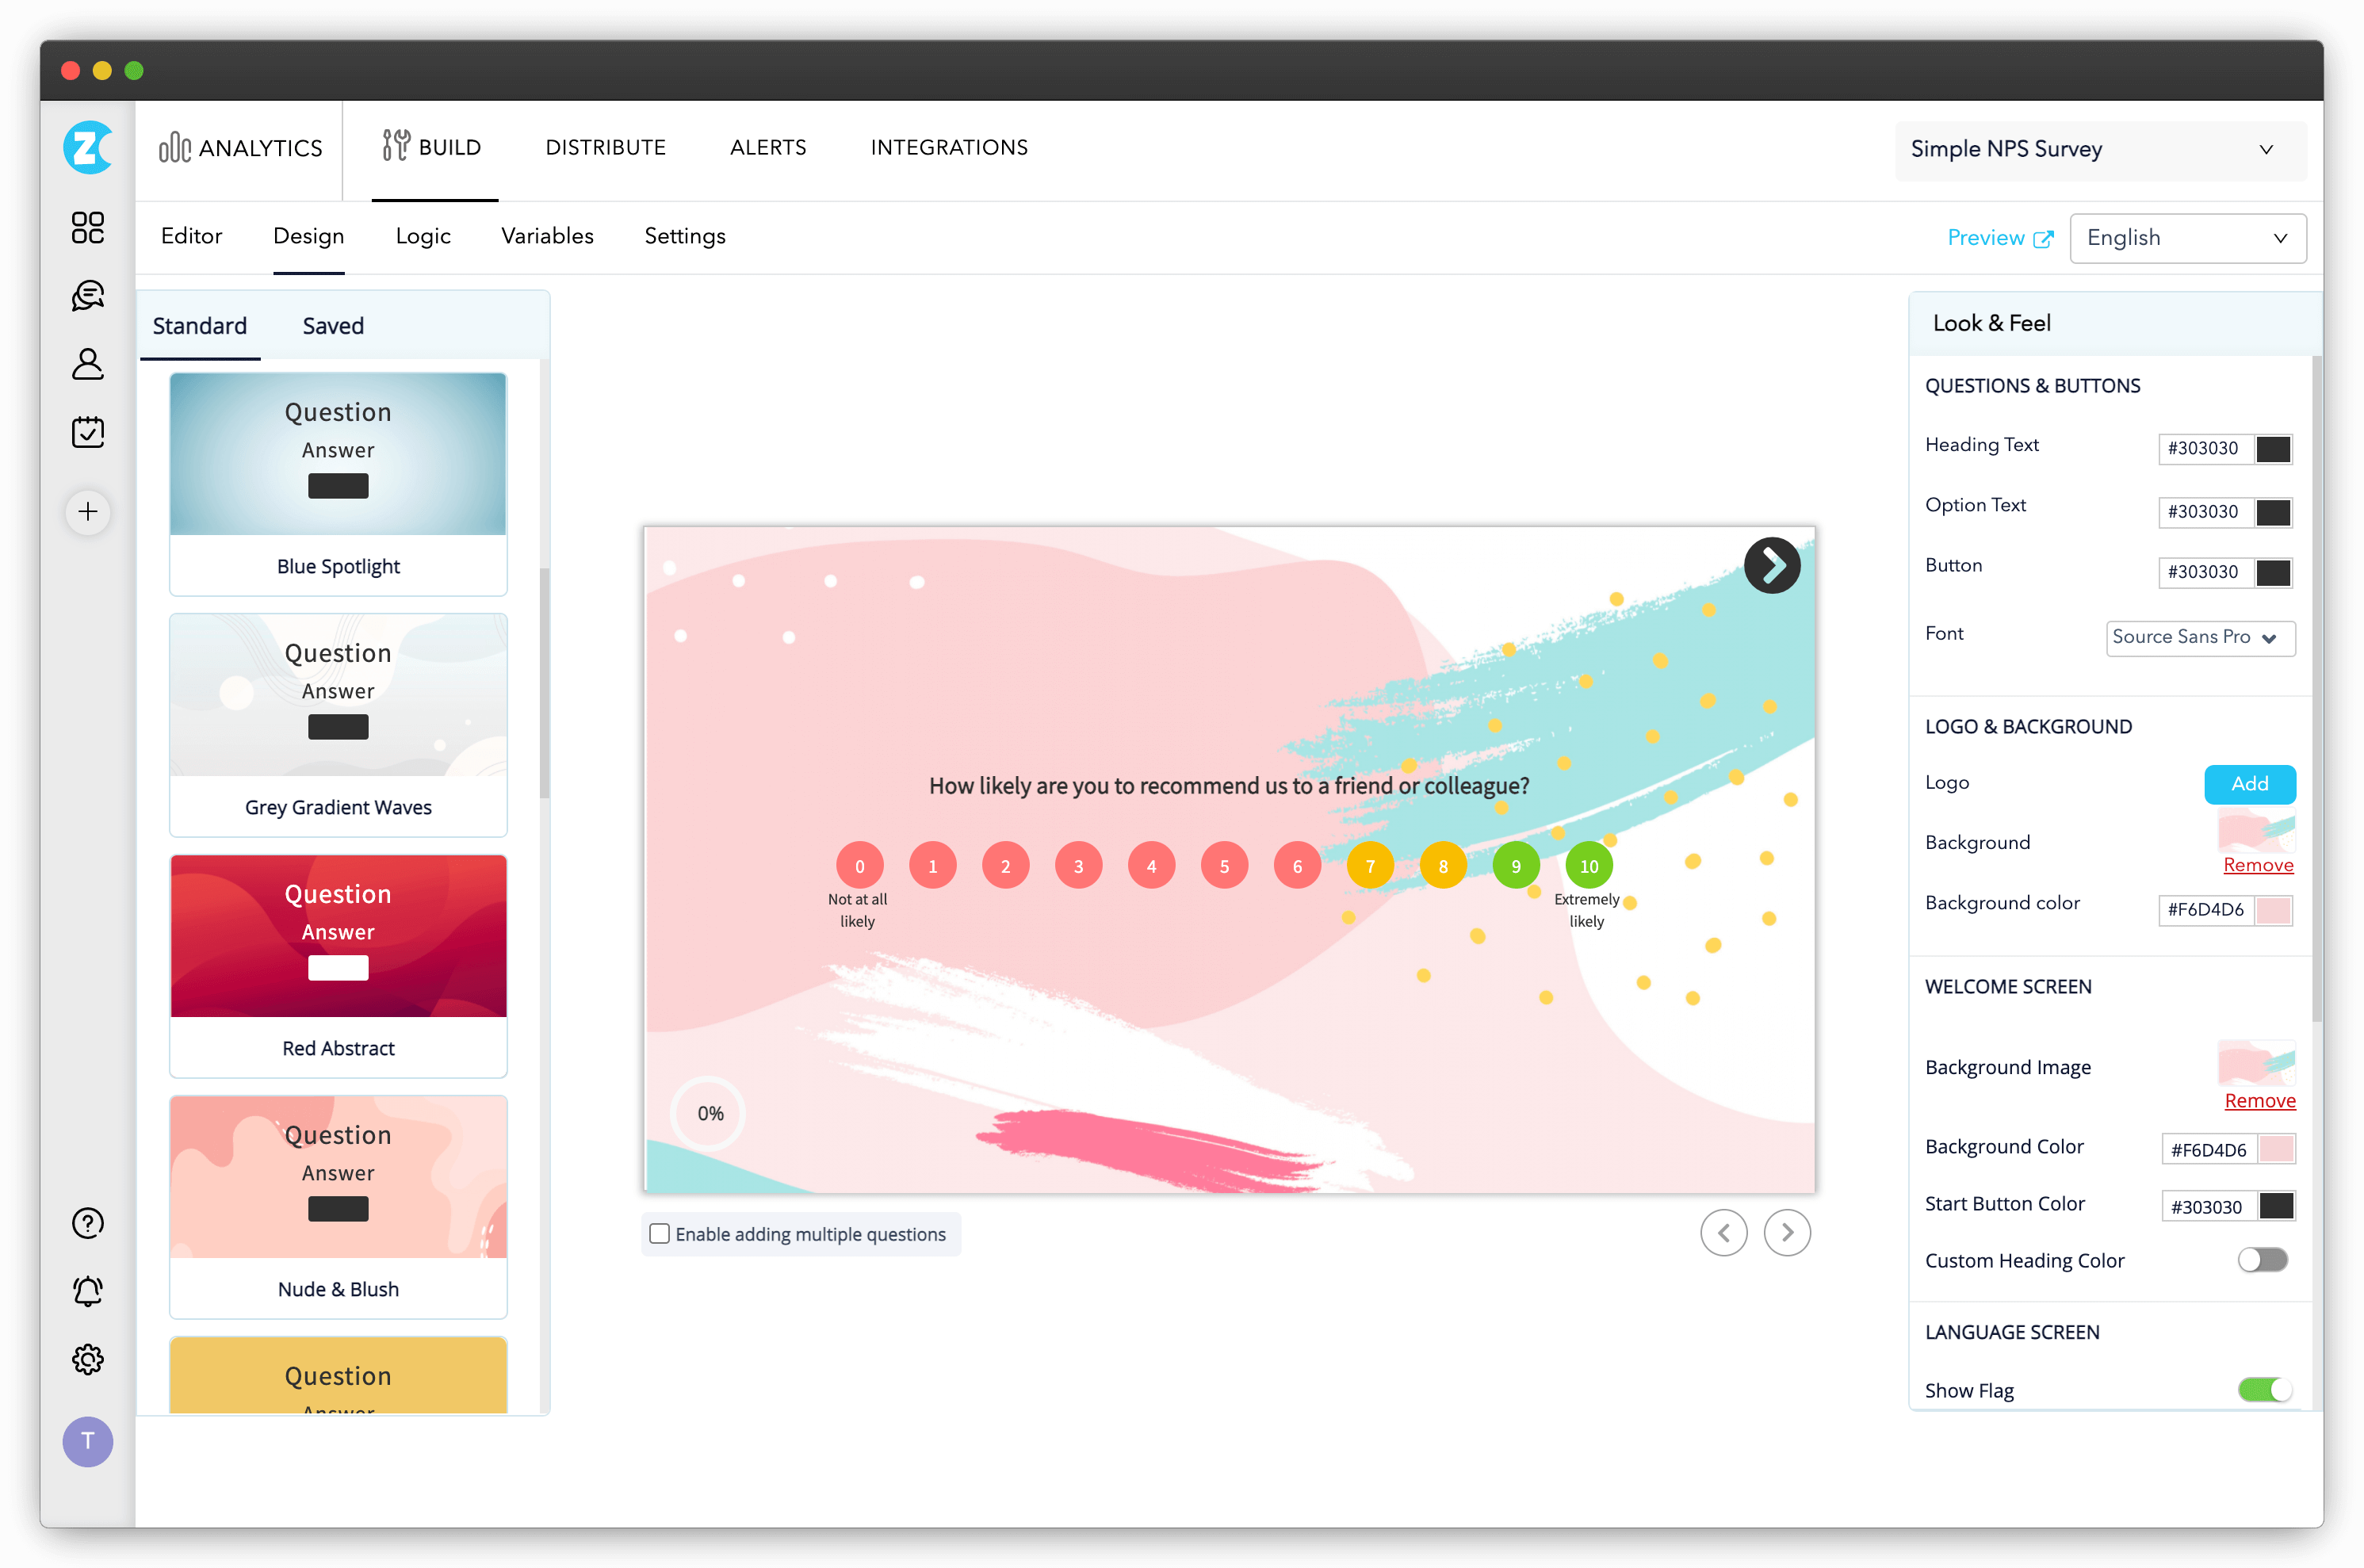 Introducing Team Performance Survey Report - Track how well your team is doing